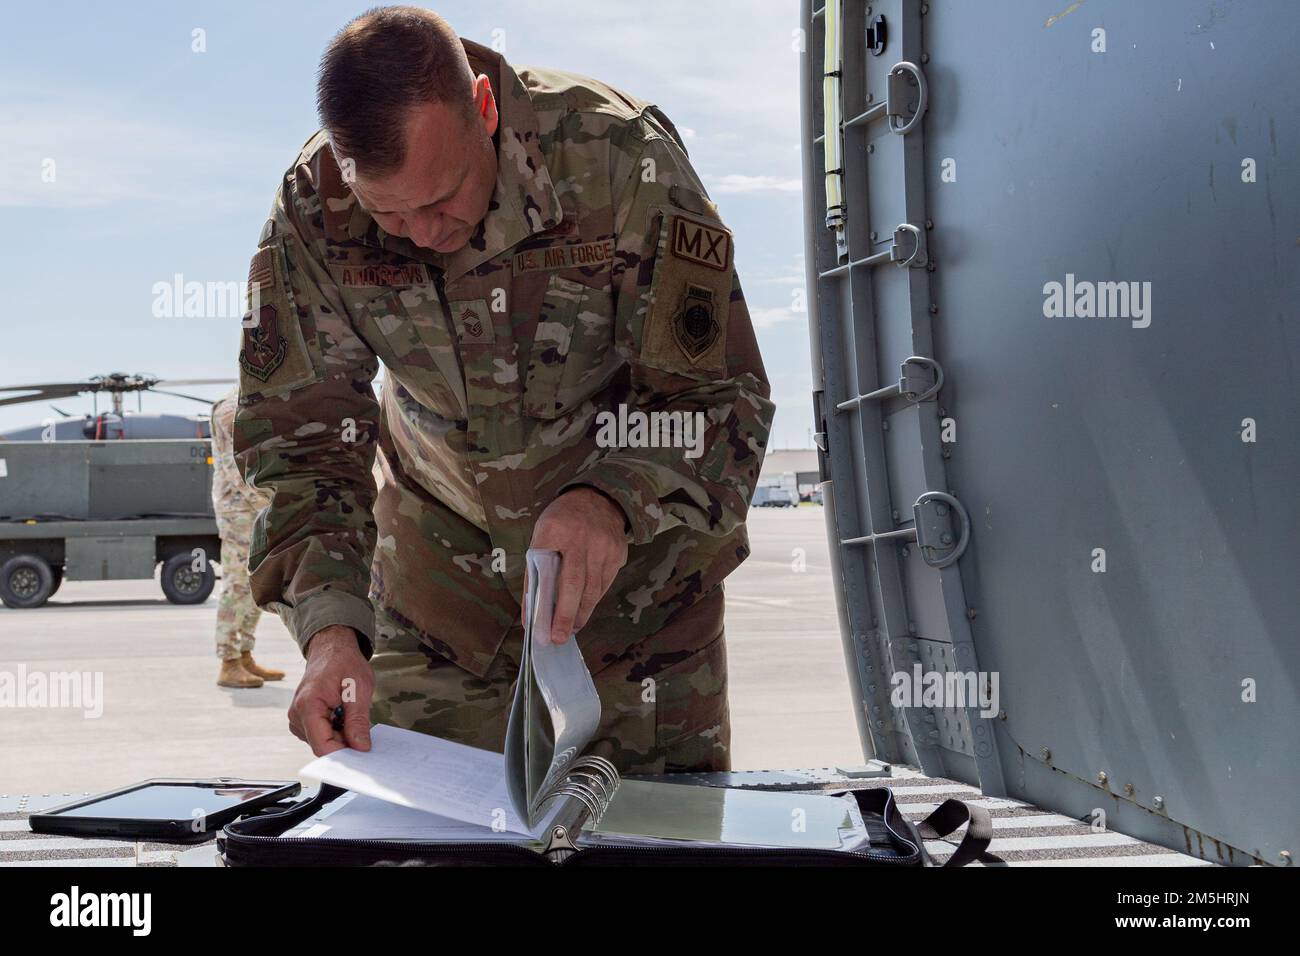 U.S. Air Force Chief Master Sgt. Shawn Andrews, 93rd Air Ground Operations Wing command chief, inspects a maintenance binder during a Top Tiger competition at Moody Air Force Base, Georgia, March 18, 2022. Maintenance binders contain tactics, techniques and procedures on how to safely and efficiently operate. Stock Photo